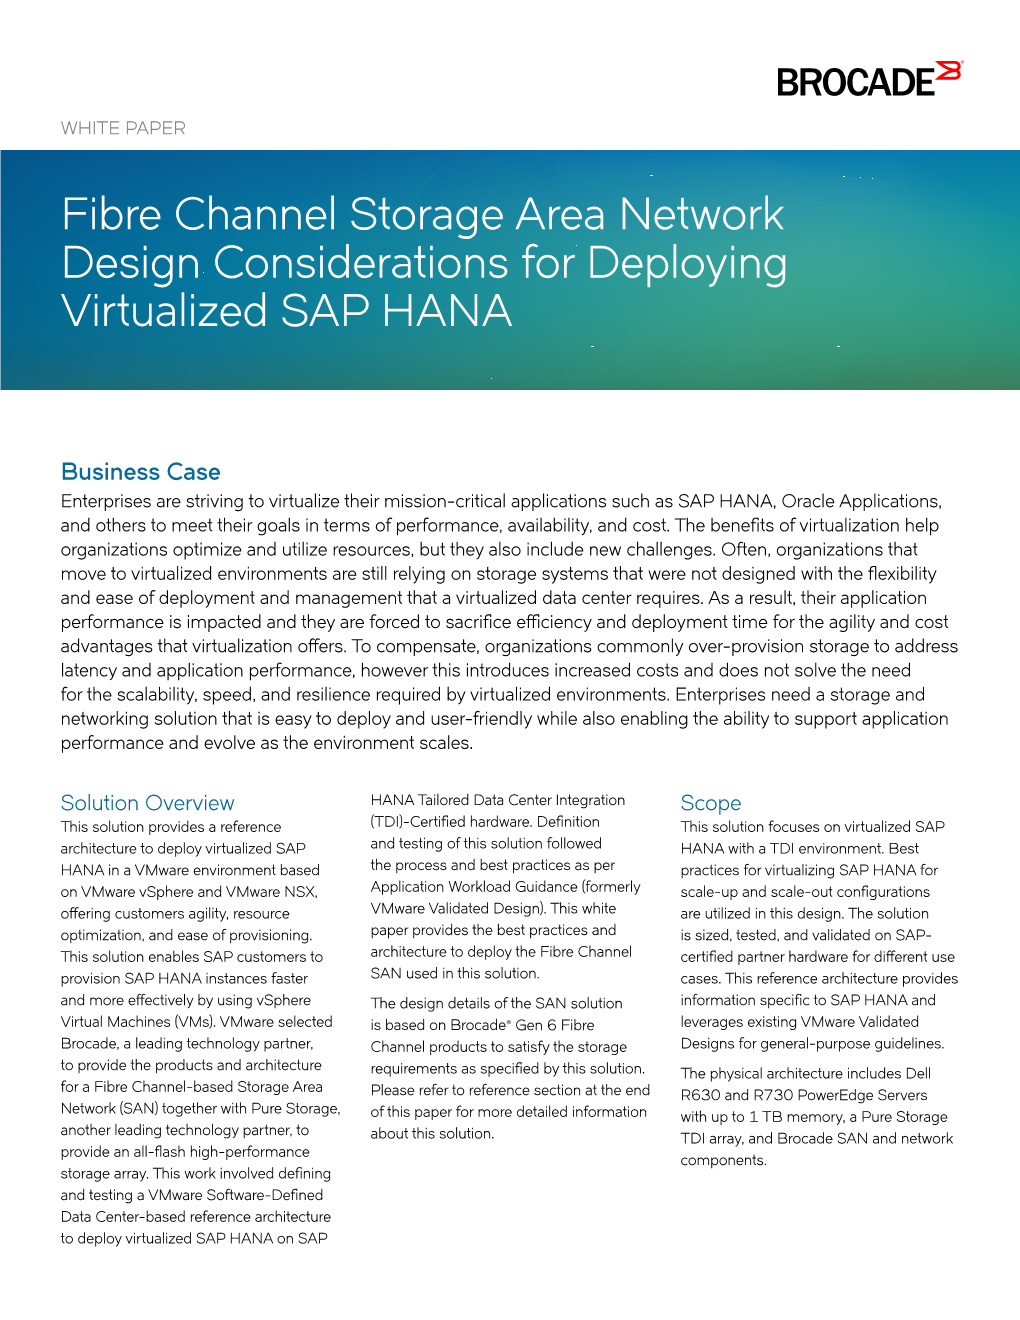 Fibre Channel Storage Area Network Design Considerations for Deploying Virtualized SAP HANA